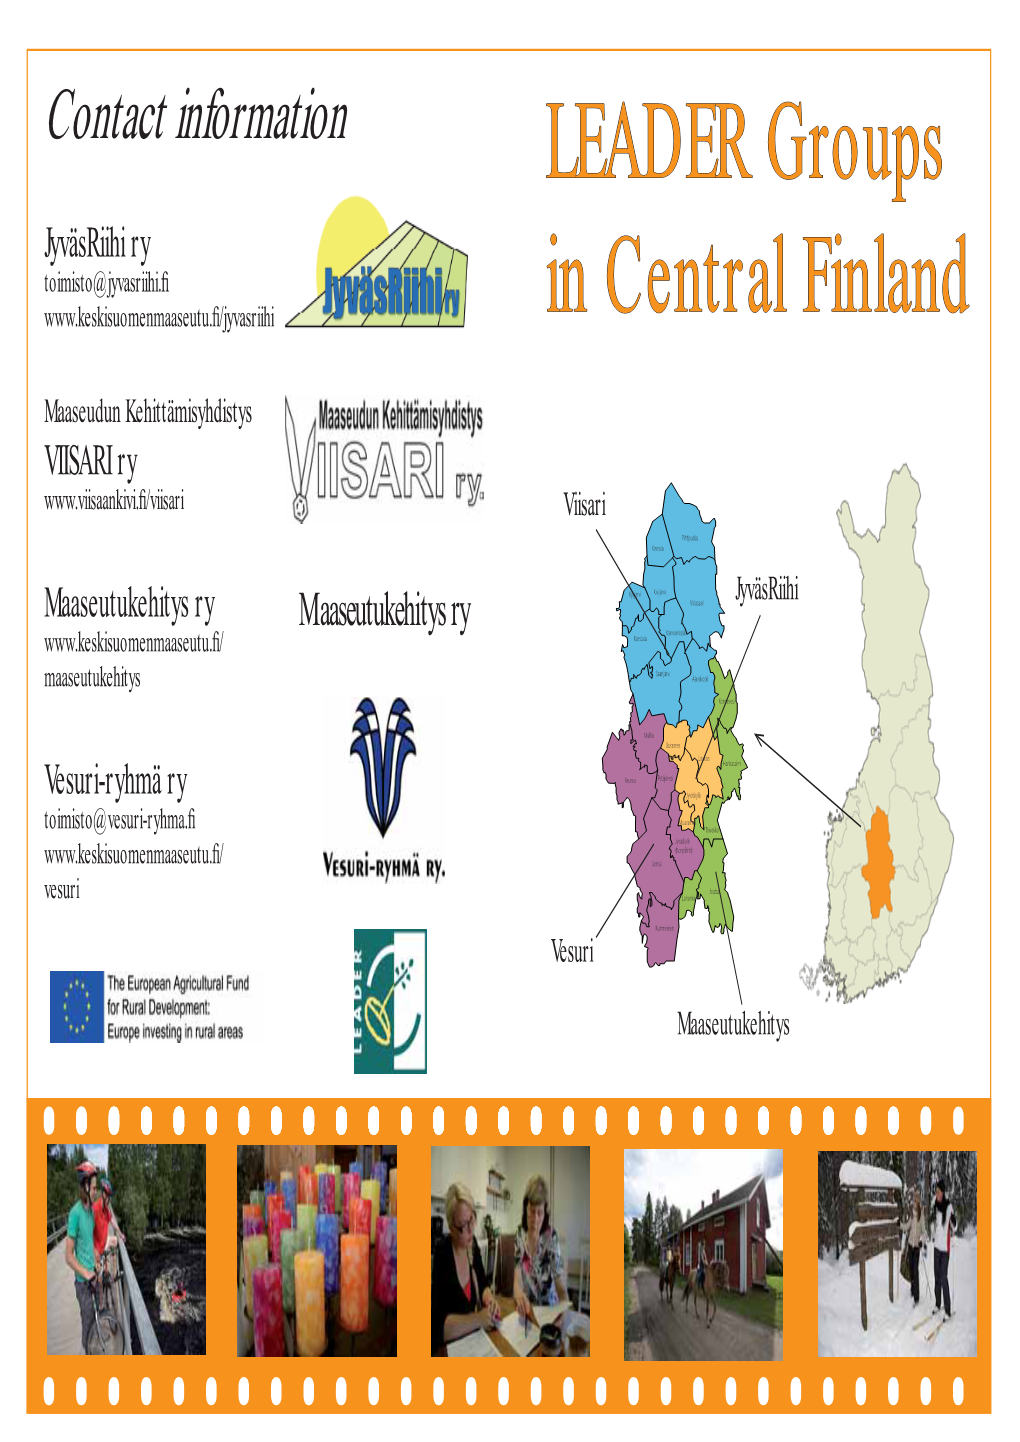 LEADER Groups in Central Finland